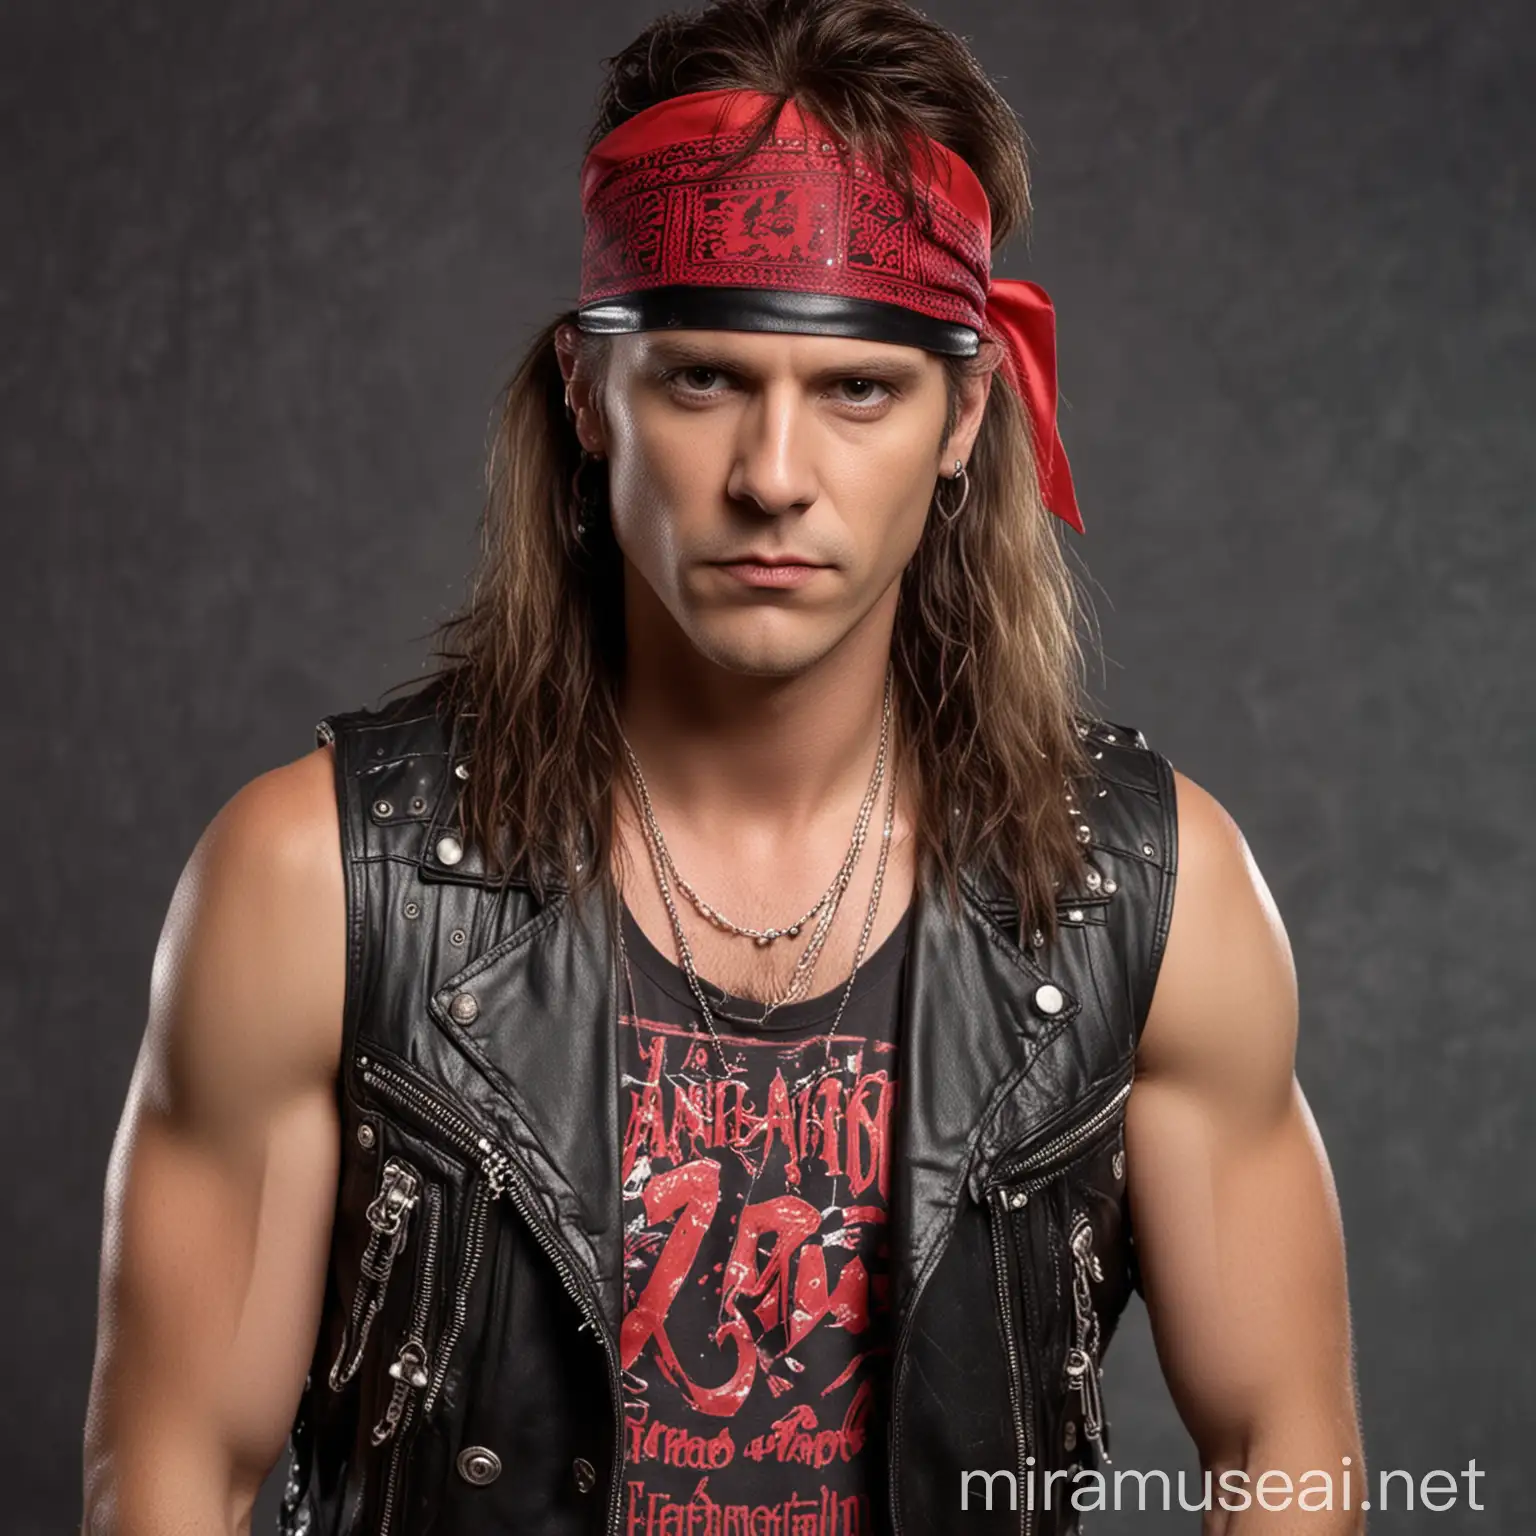 80s Glam Metal Rocker with Mullet and Red Bandana in Leather Vest